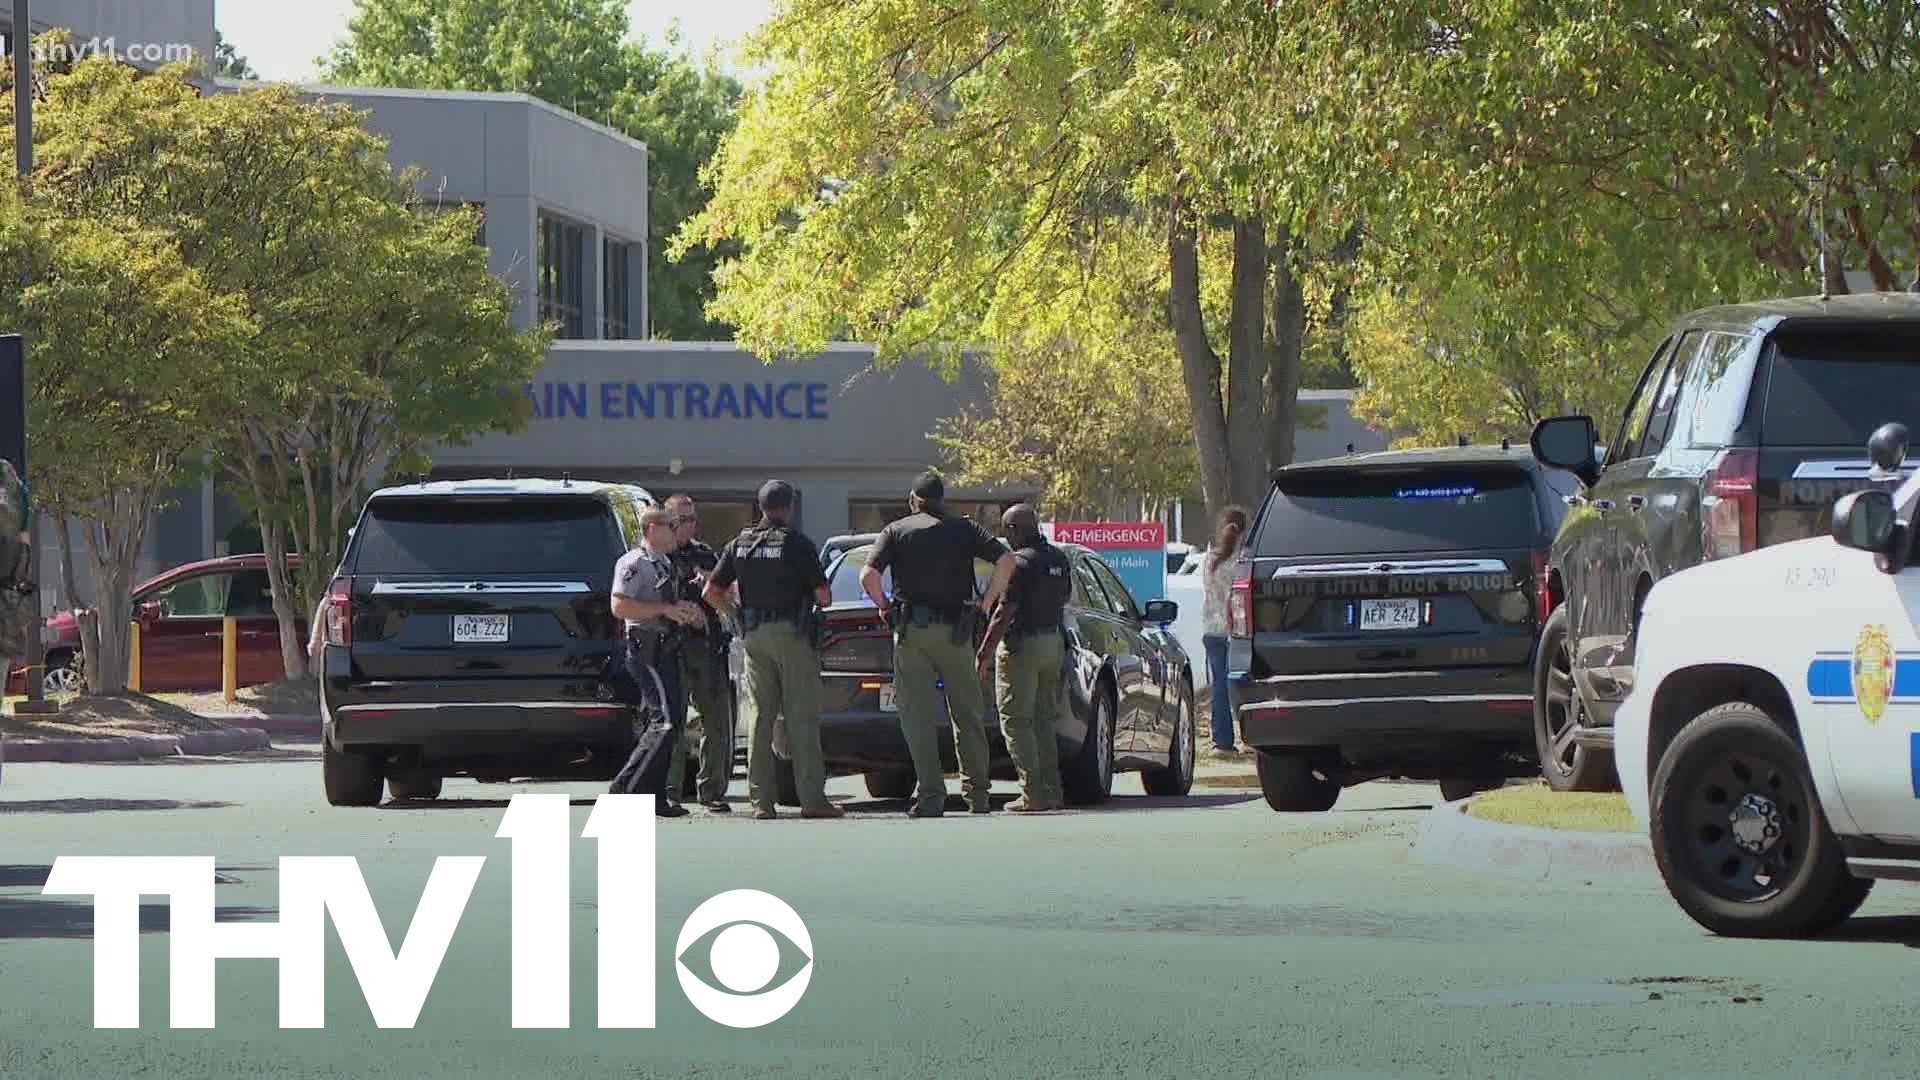 A suspect has now been arrested and one person is dead after an active shooter threat at CHI St. Vincent North hospital in Sherwood.